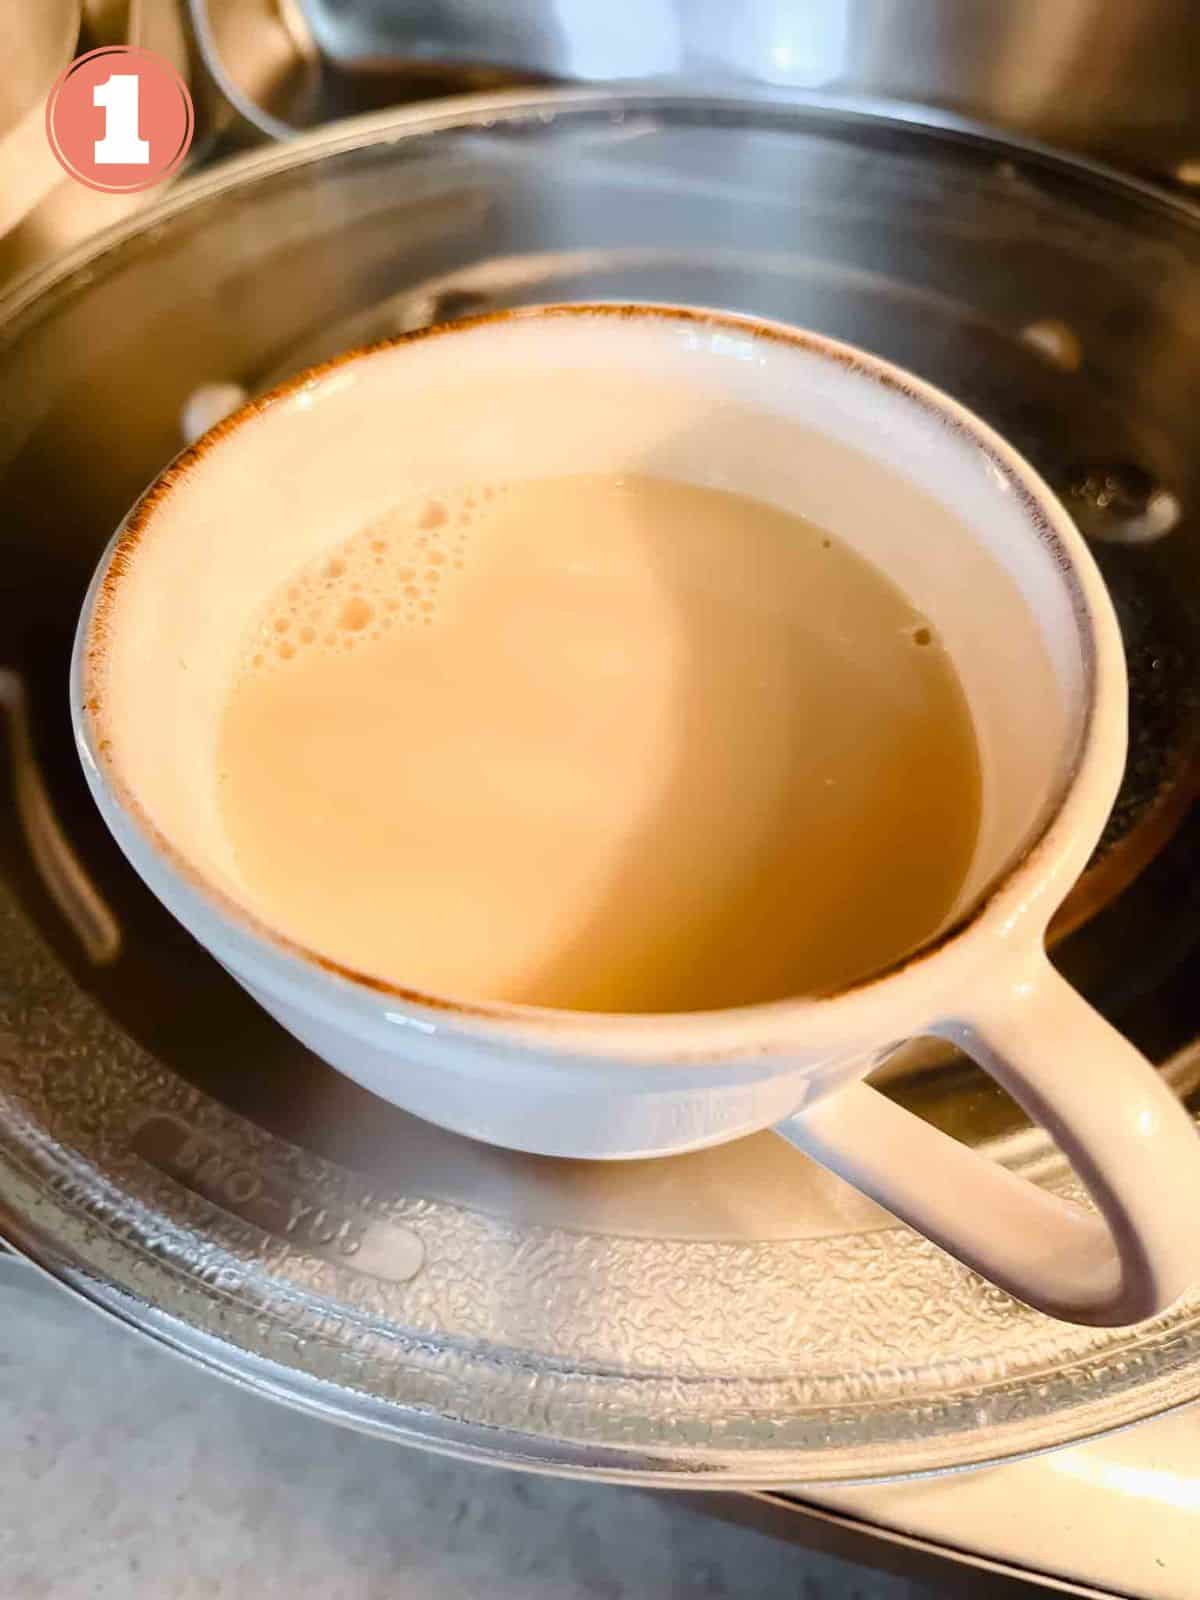 oat milk in a beige mug being heated in the microwave labelled number one.